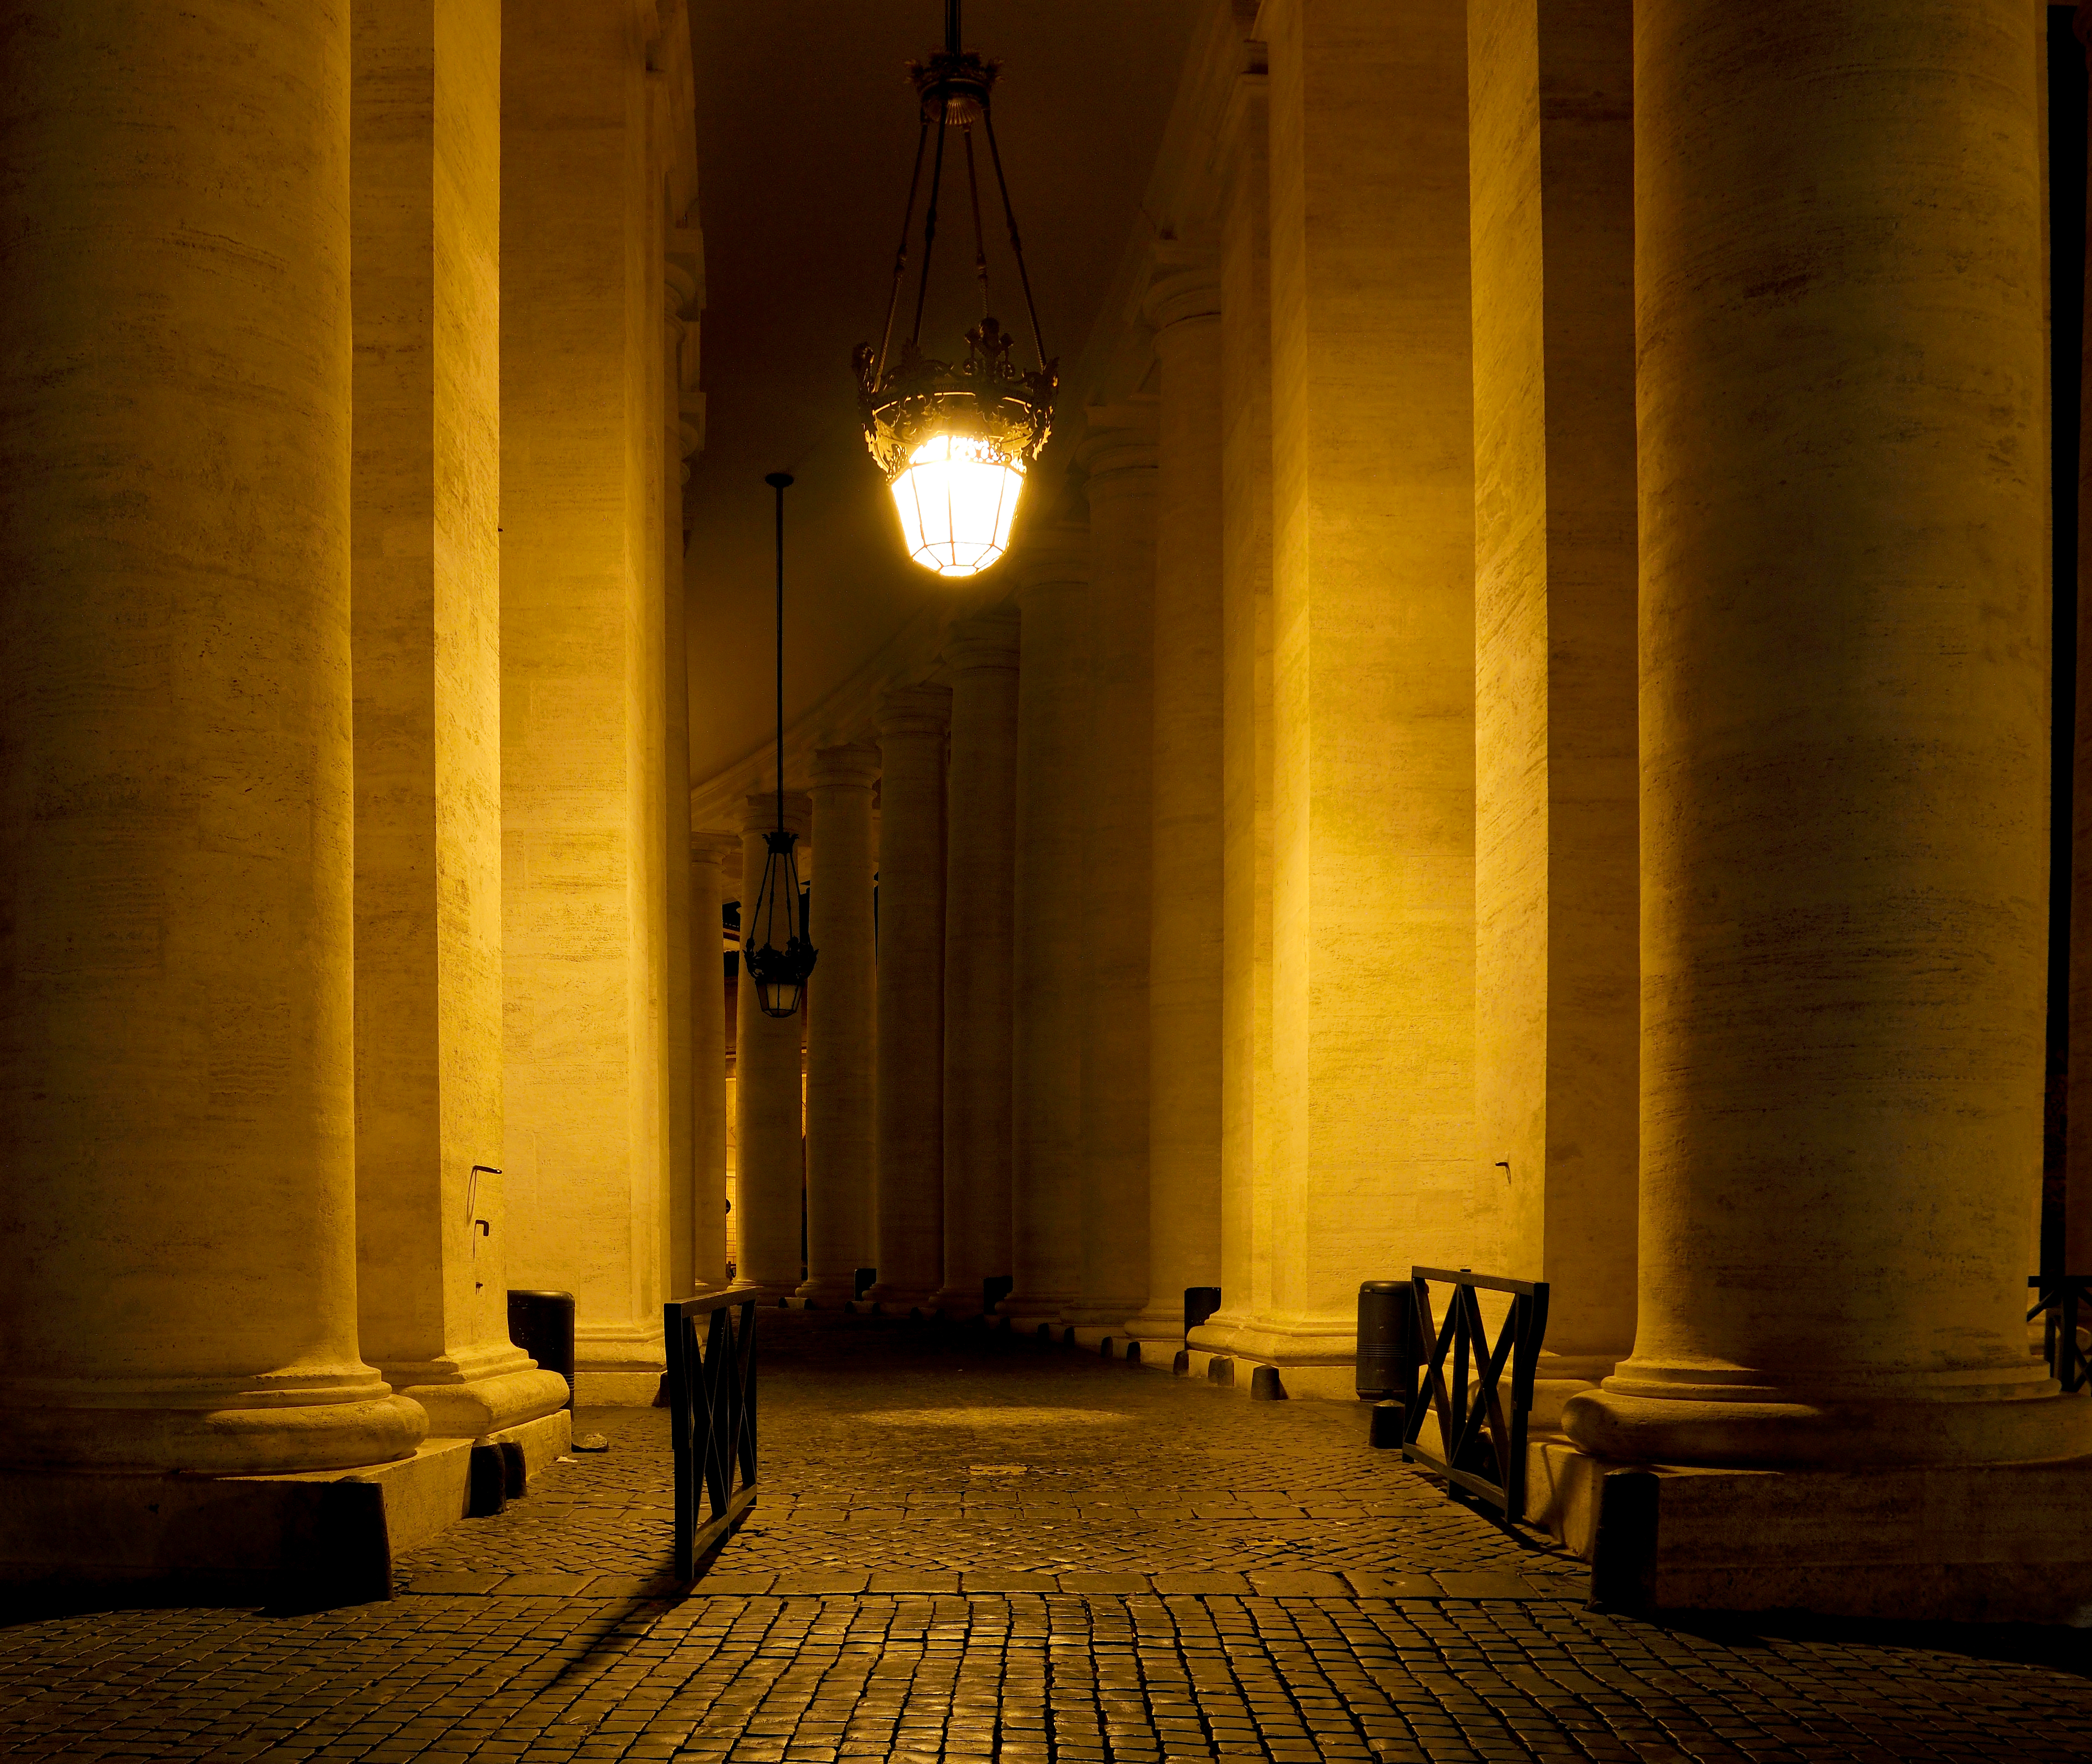 Colonnade of St. Peter at night